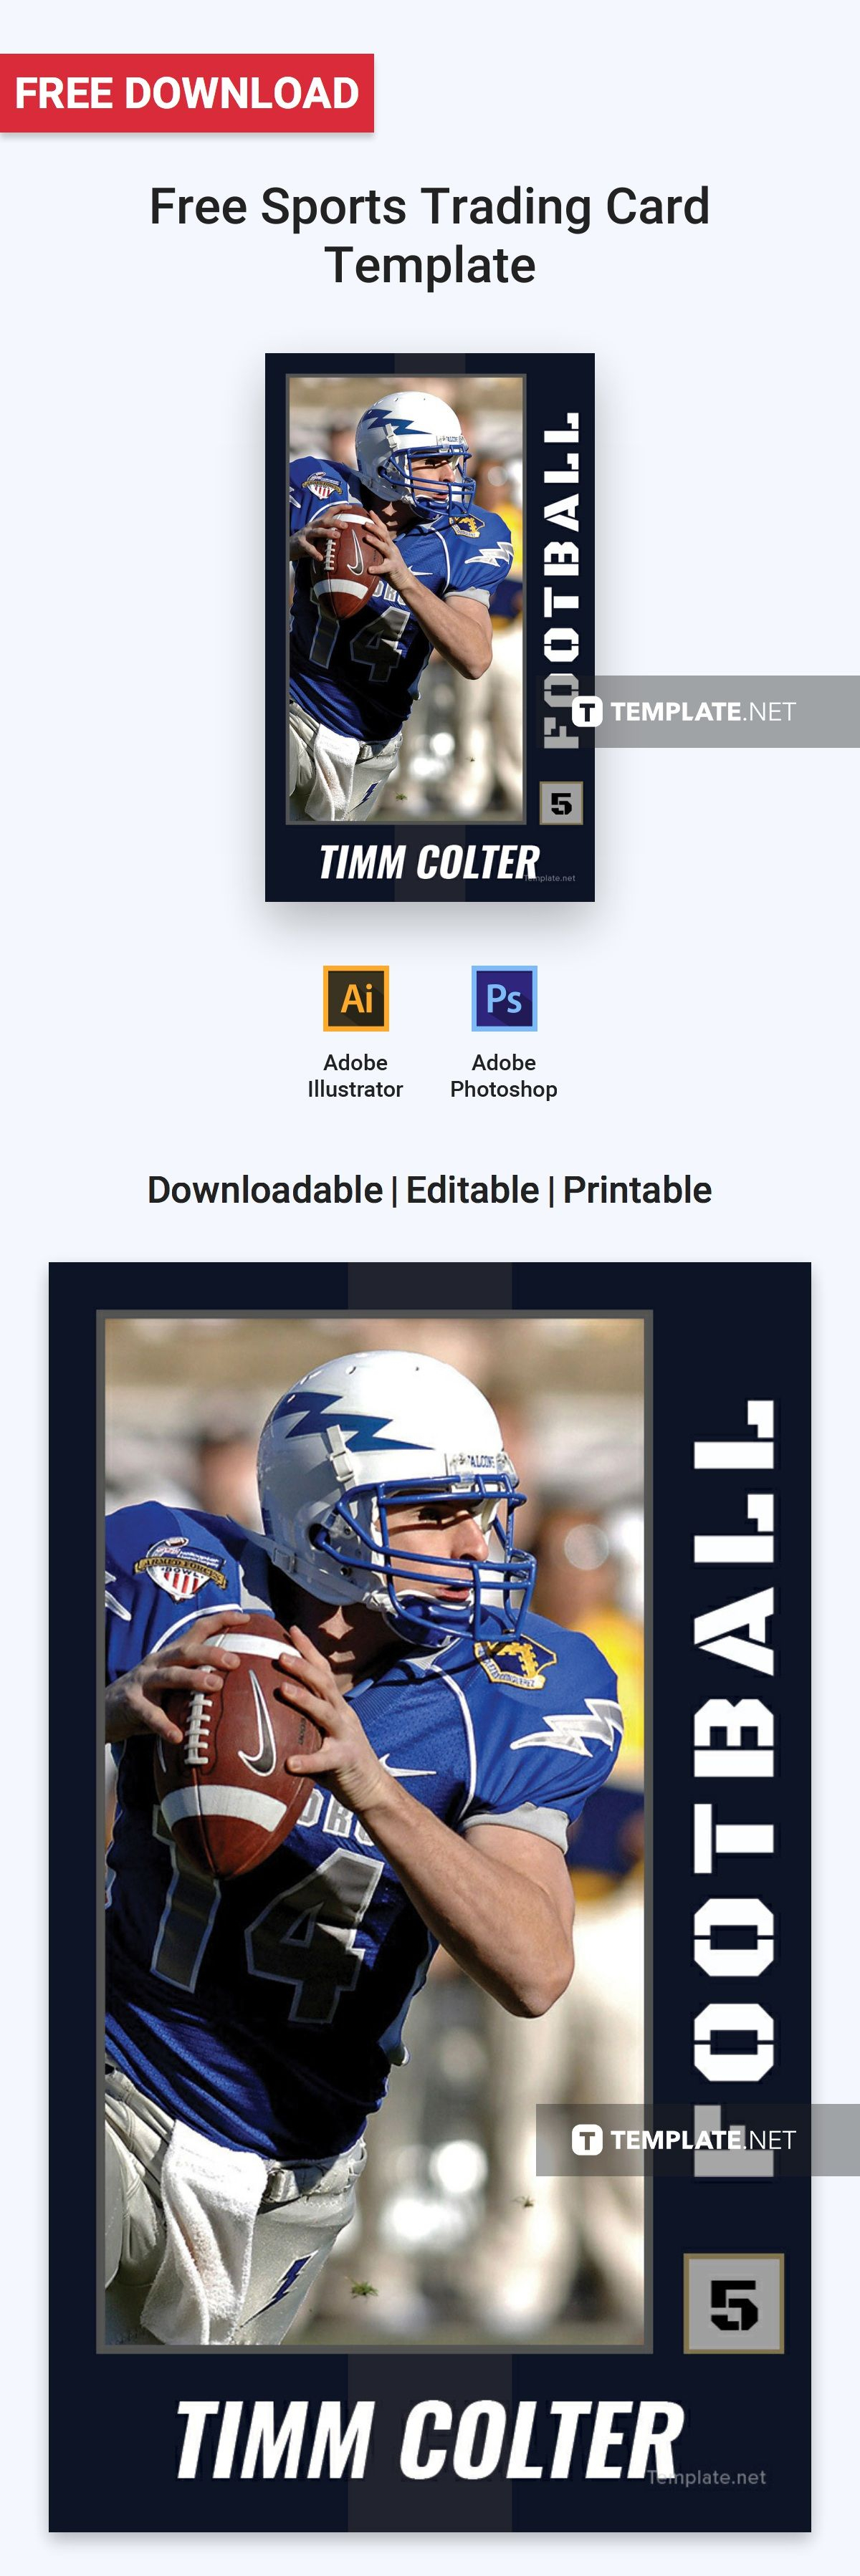 Free Sports Trading Card | Card Templates & Designs 2019 In Throughout Free Sports Card Template